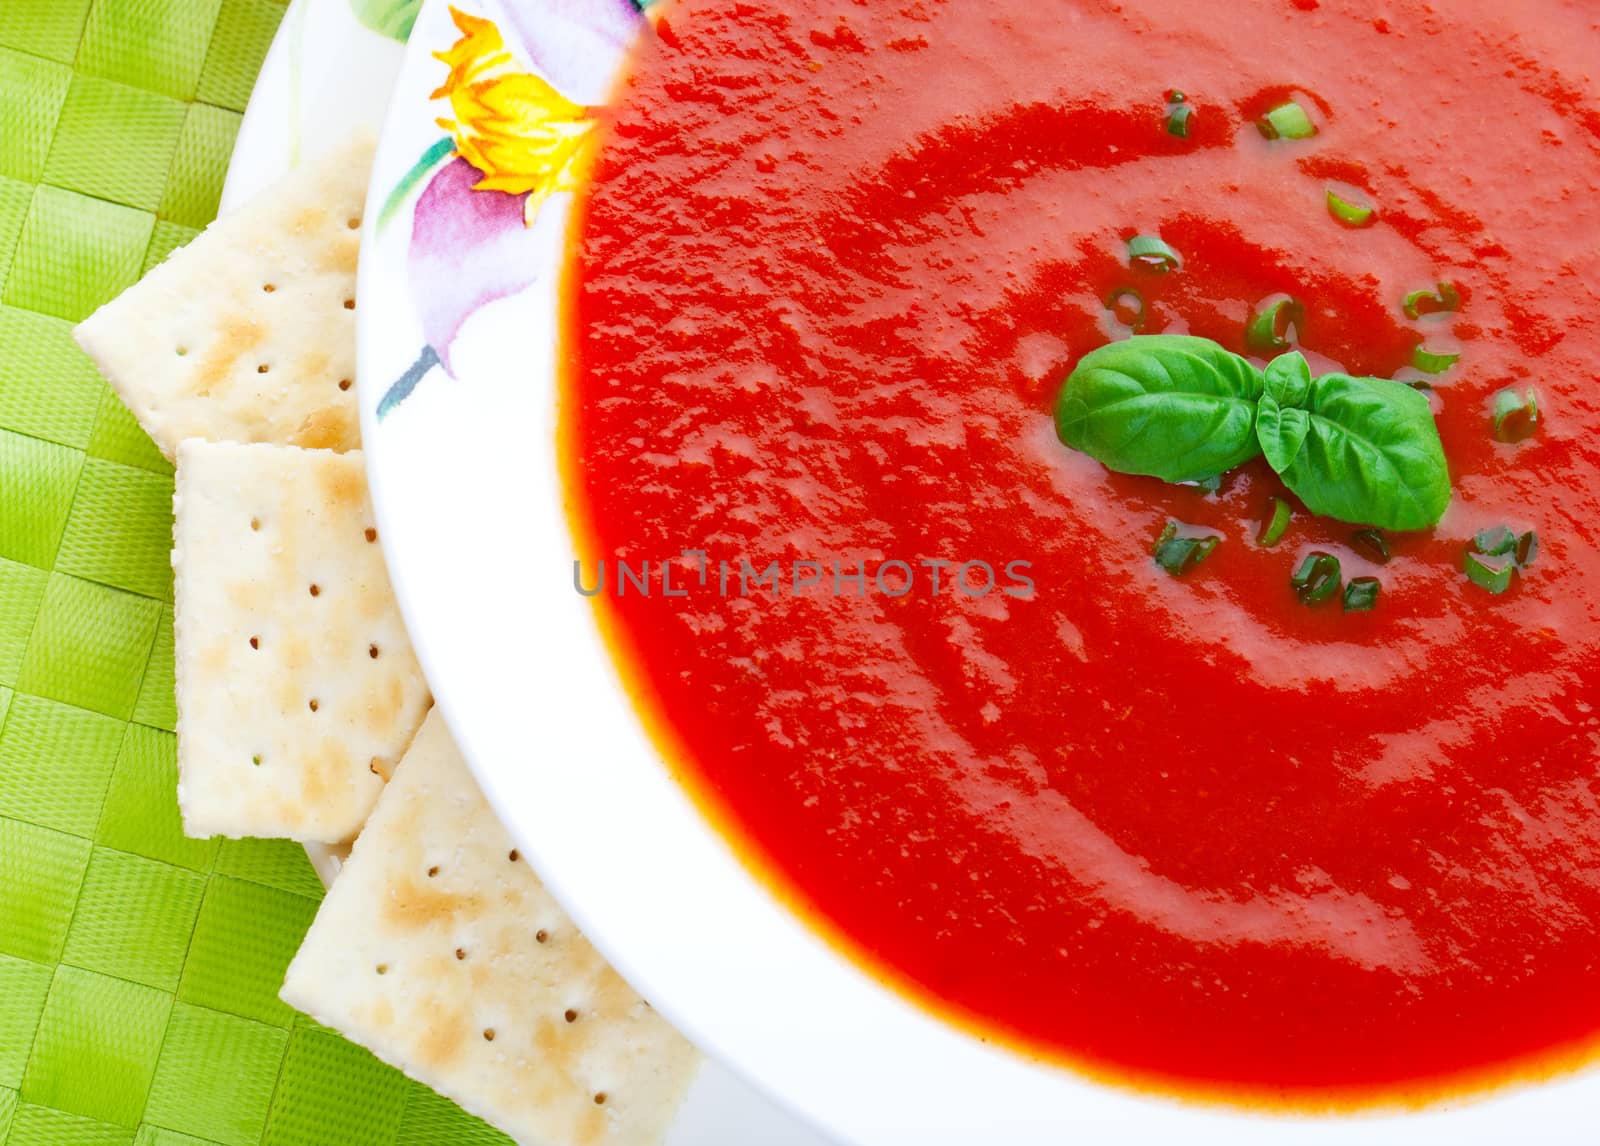 Thick and hearty tomato soup, made from fresh tomatoes and garnished with chives and a sprig of fresh basil.  Served with lightly salted crackers.